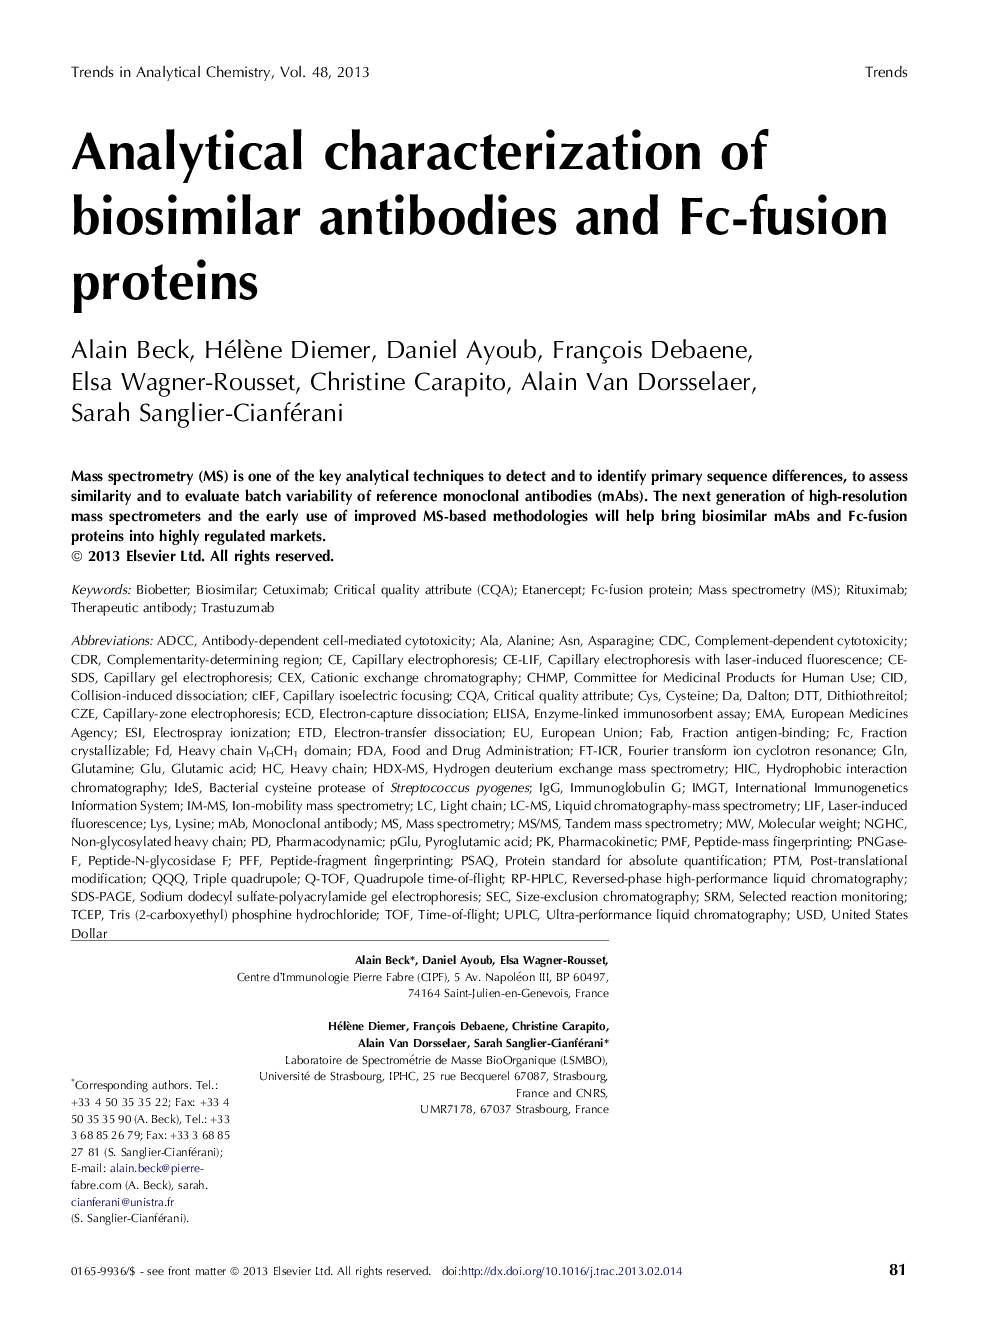 Analytical characterization of biosimilar antibodies and Fc-fusion proteins